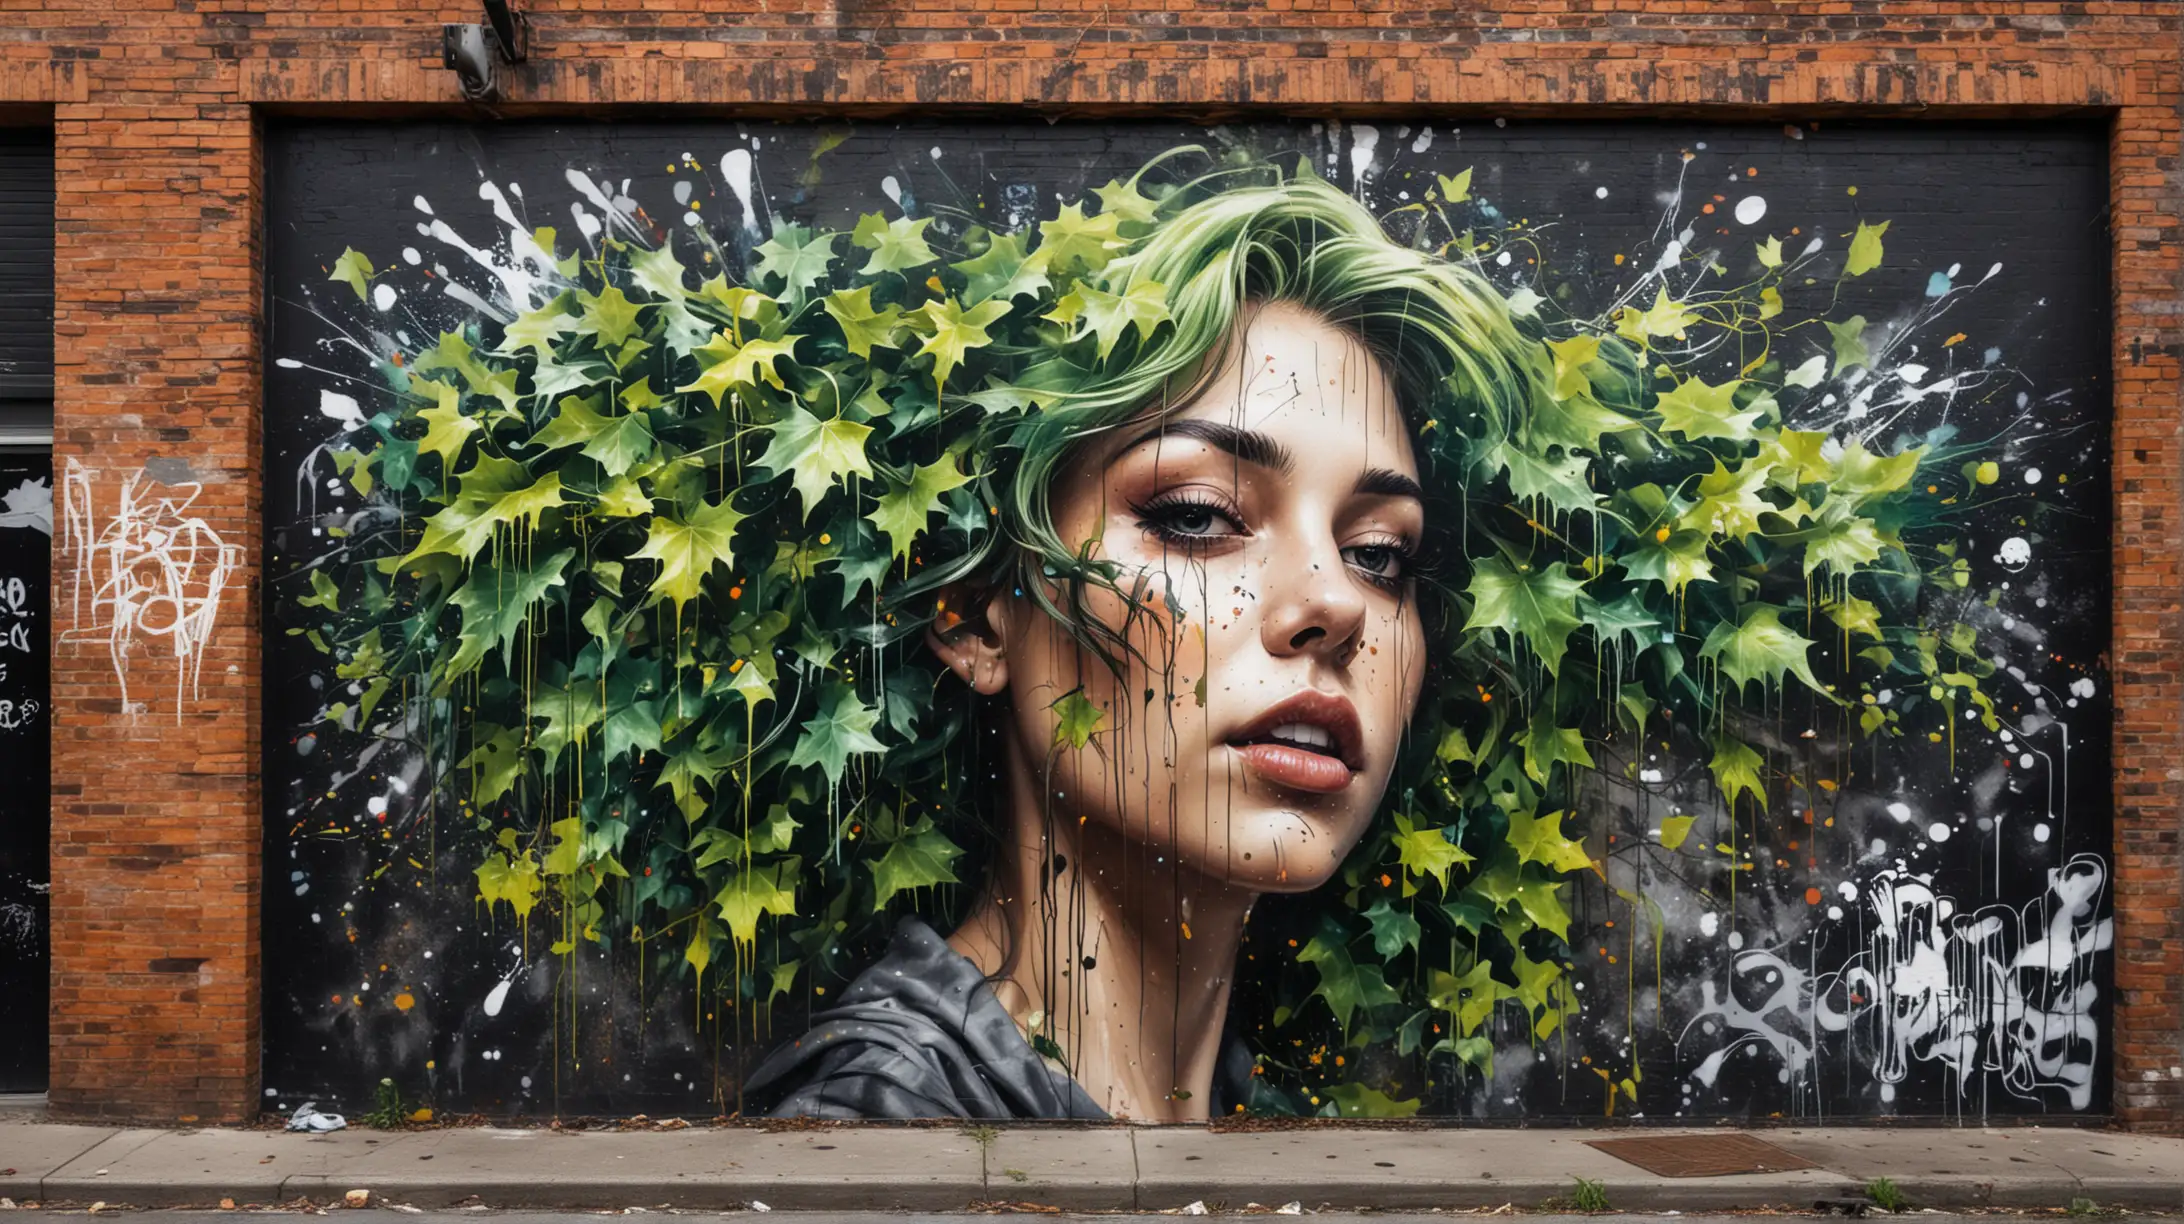 Graffiti-inspired mural of ivy, dissimulated in the architecture, spray paint technique, alcohol splatters, urban, vibrant, dynamic.